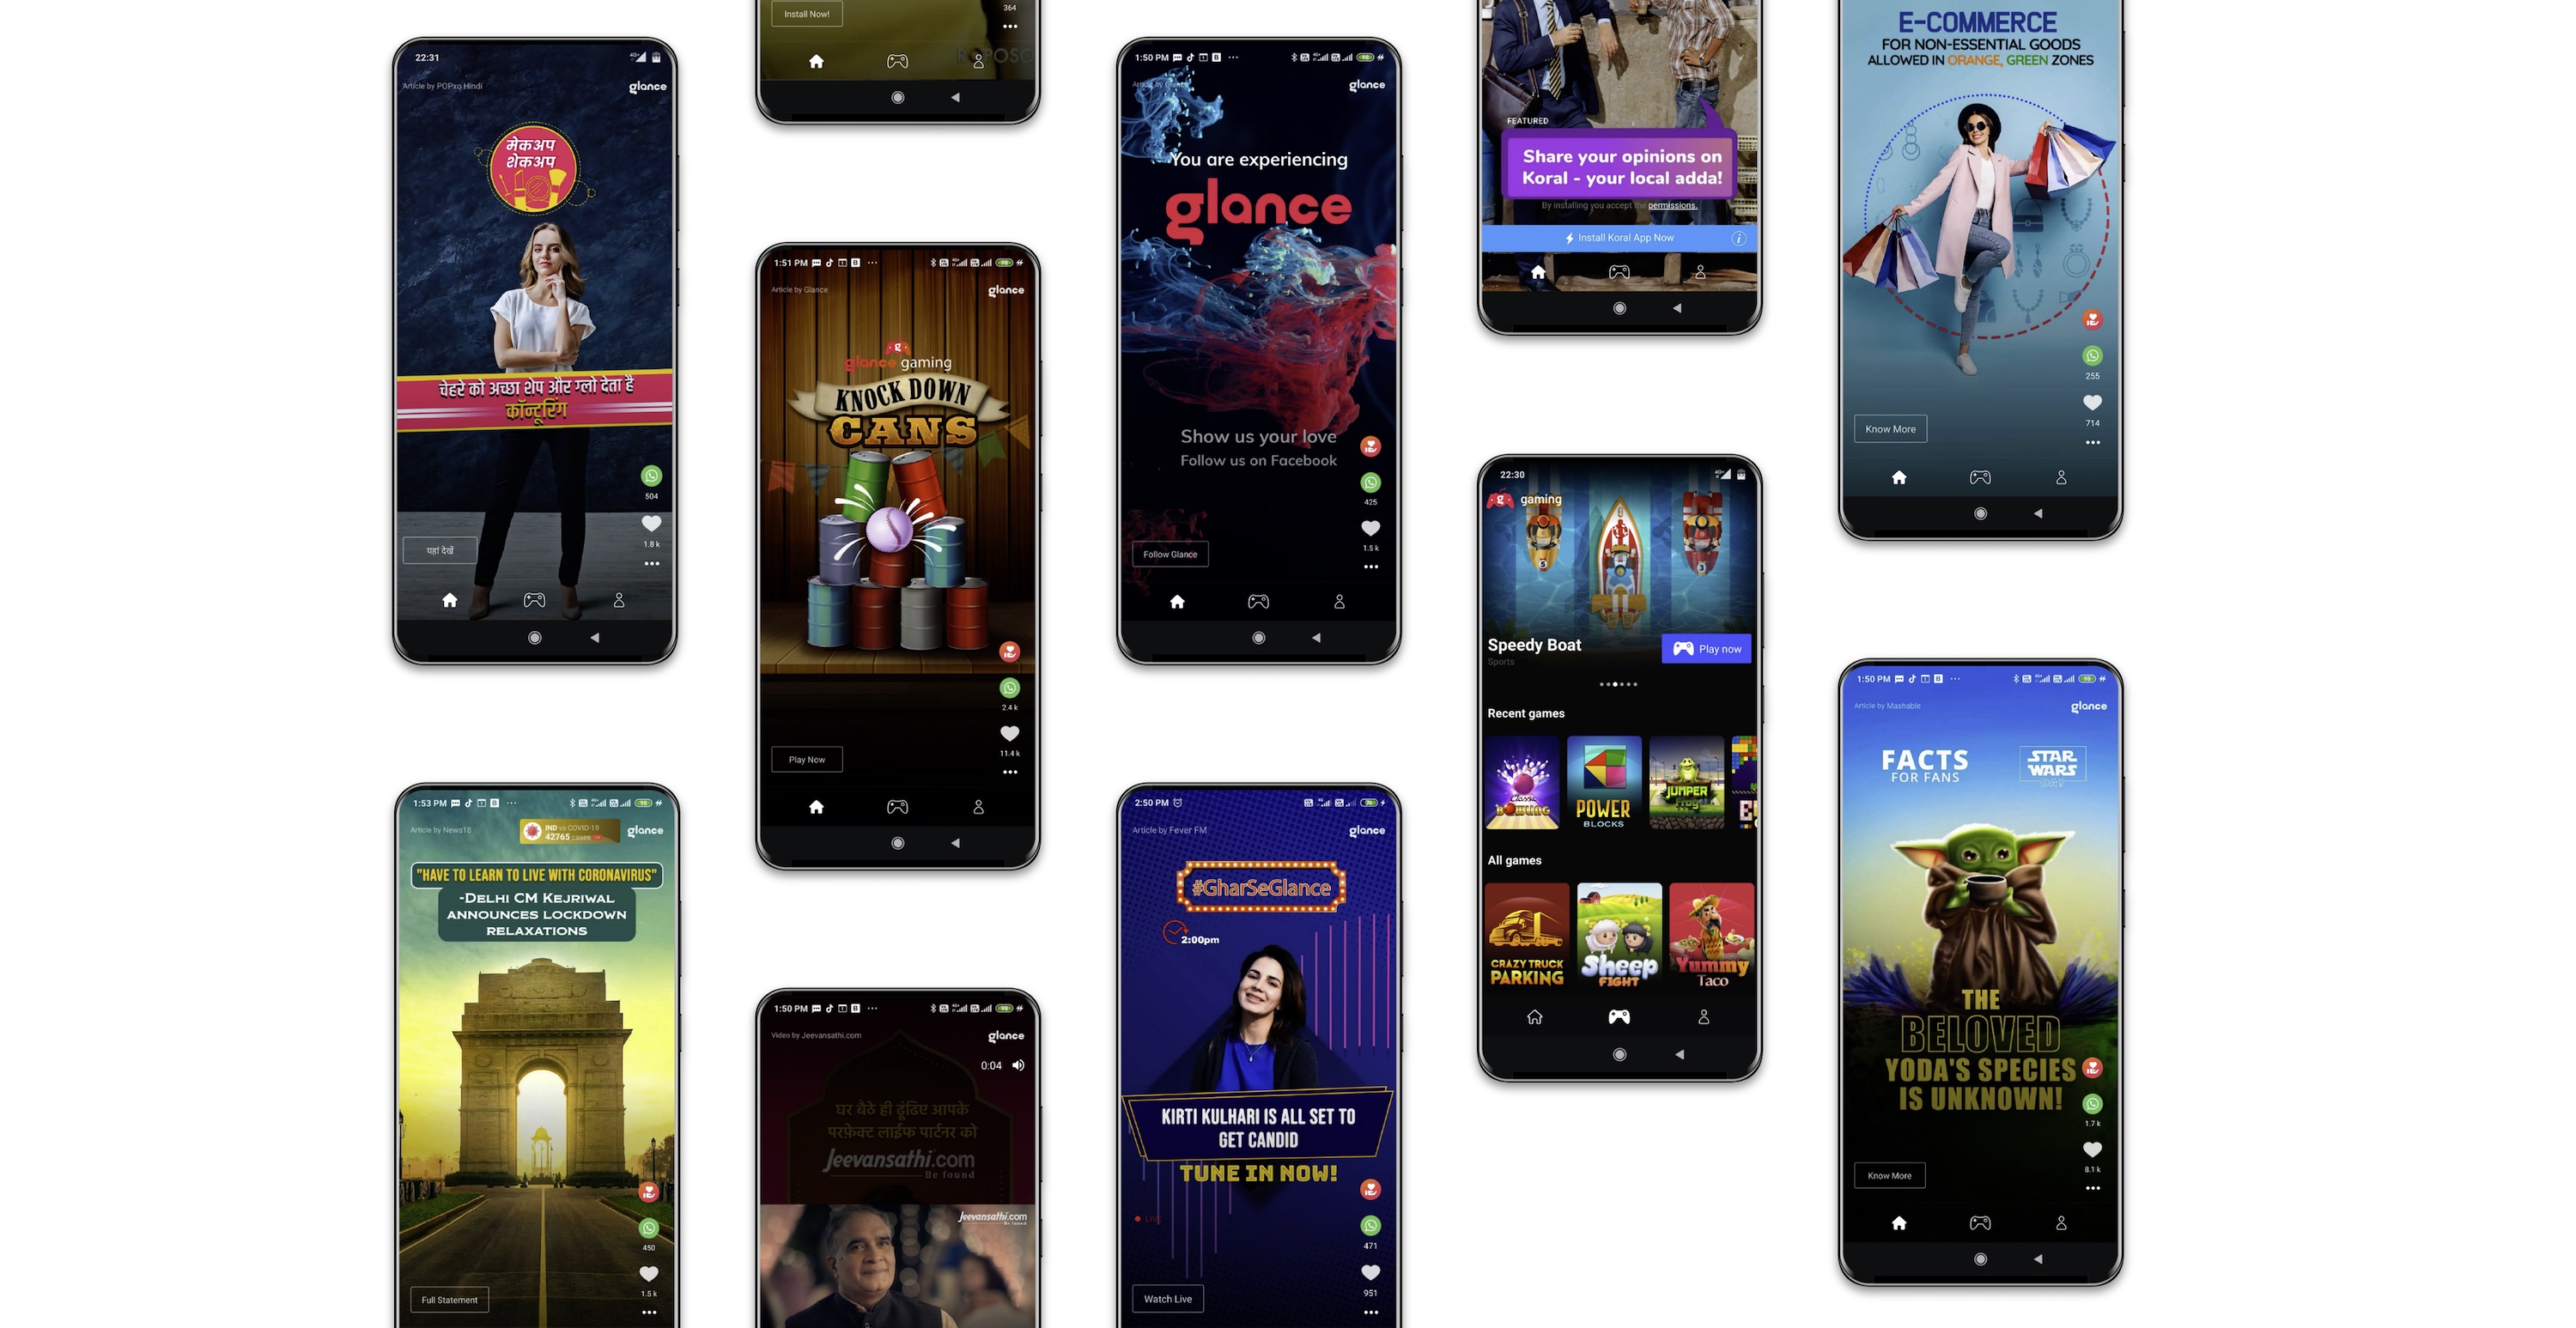 Glance Lock Screen Active Users in India Nears 200 Million